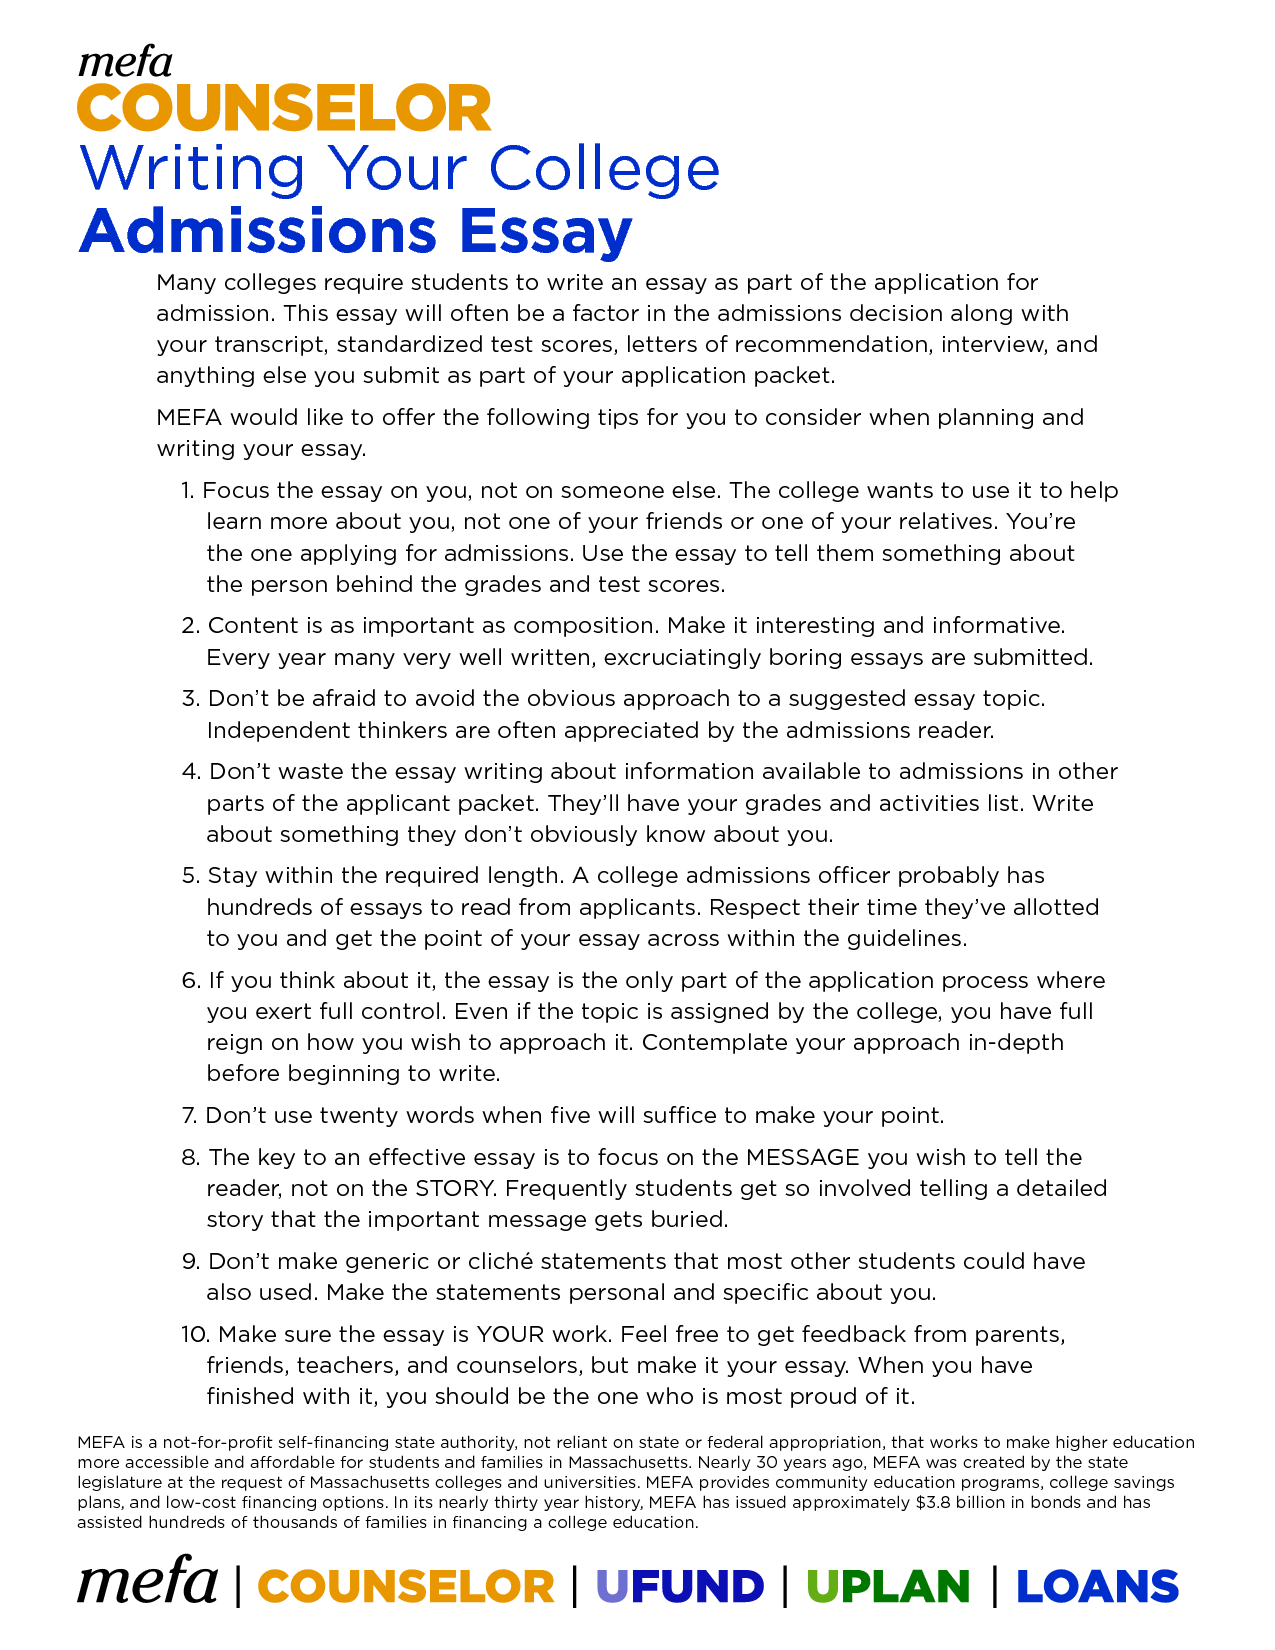 Help with writing college application essays 4